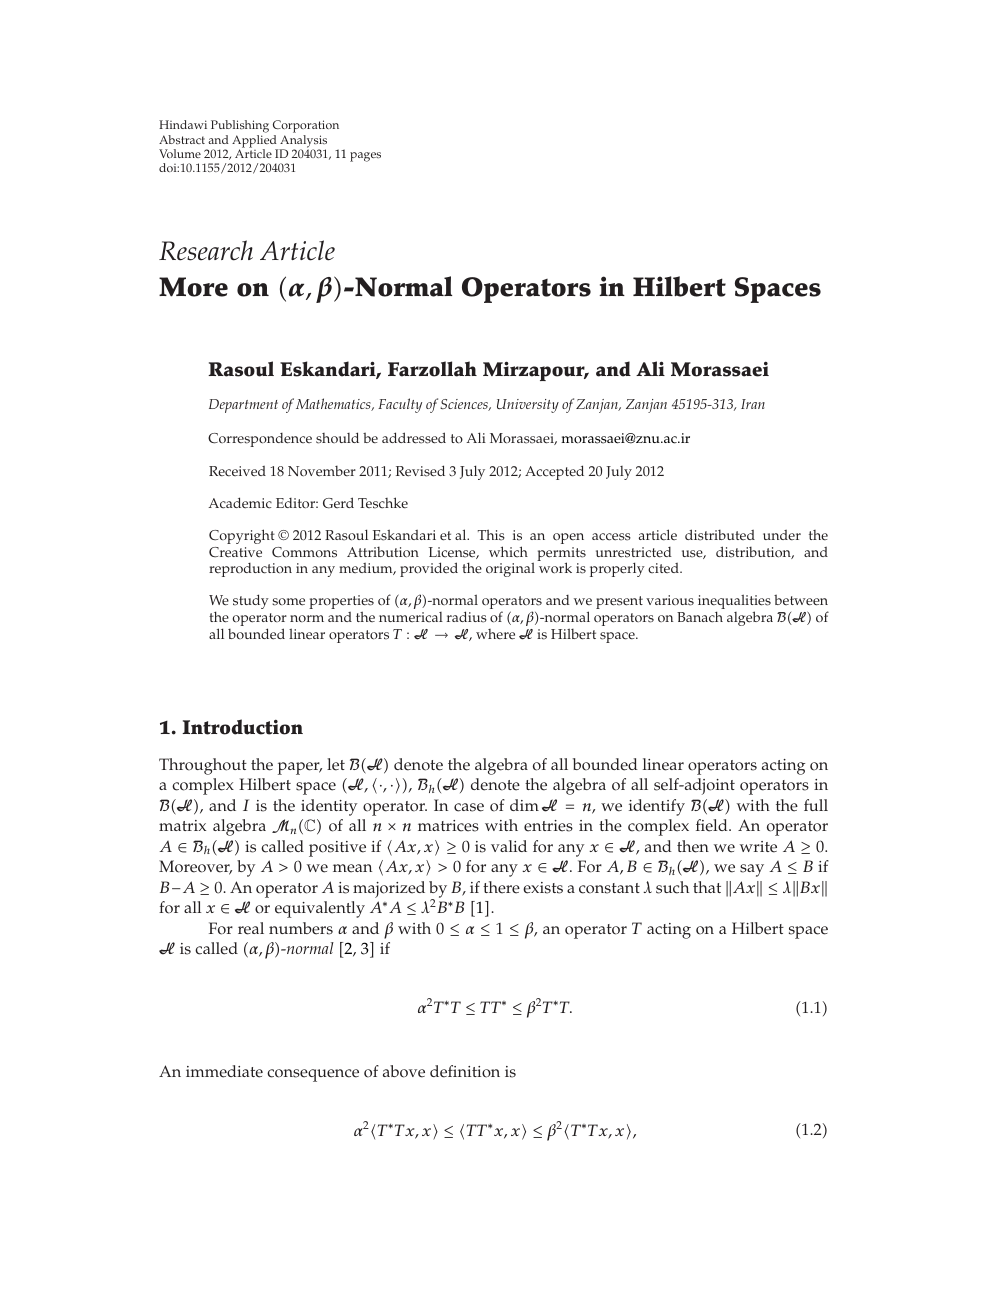 More On 𝜶 𝜷 Normal Operators In Hilbert Spaces Topic Of Research Paper In Mathematics Download Scholarly Article Pdf And Read For Free On Cyberleninka Open Science Hub